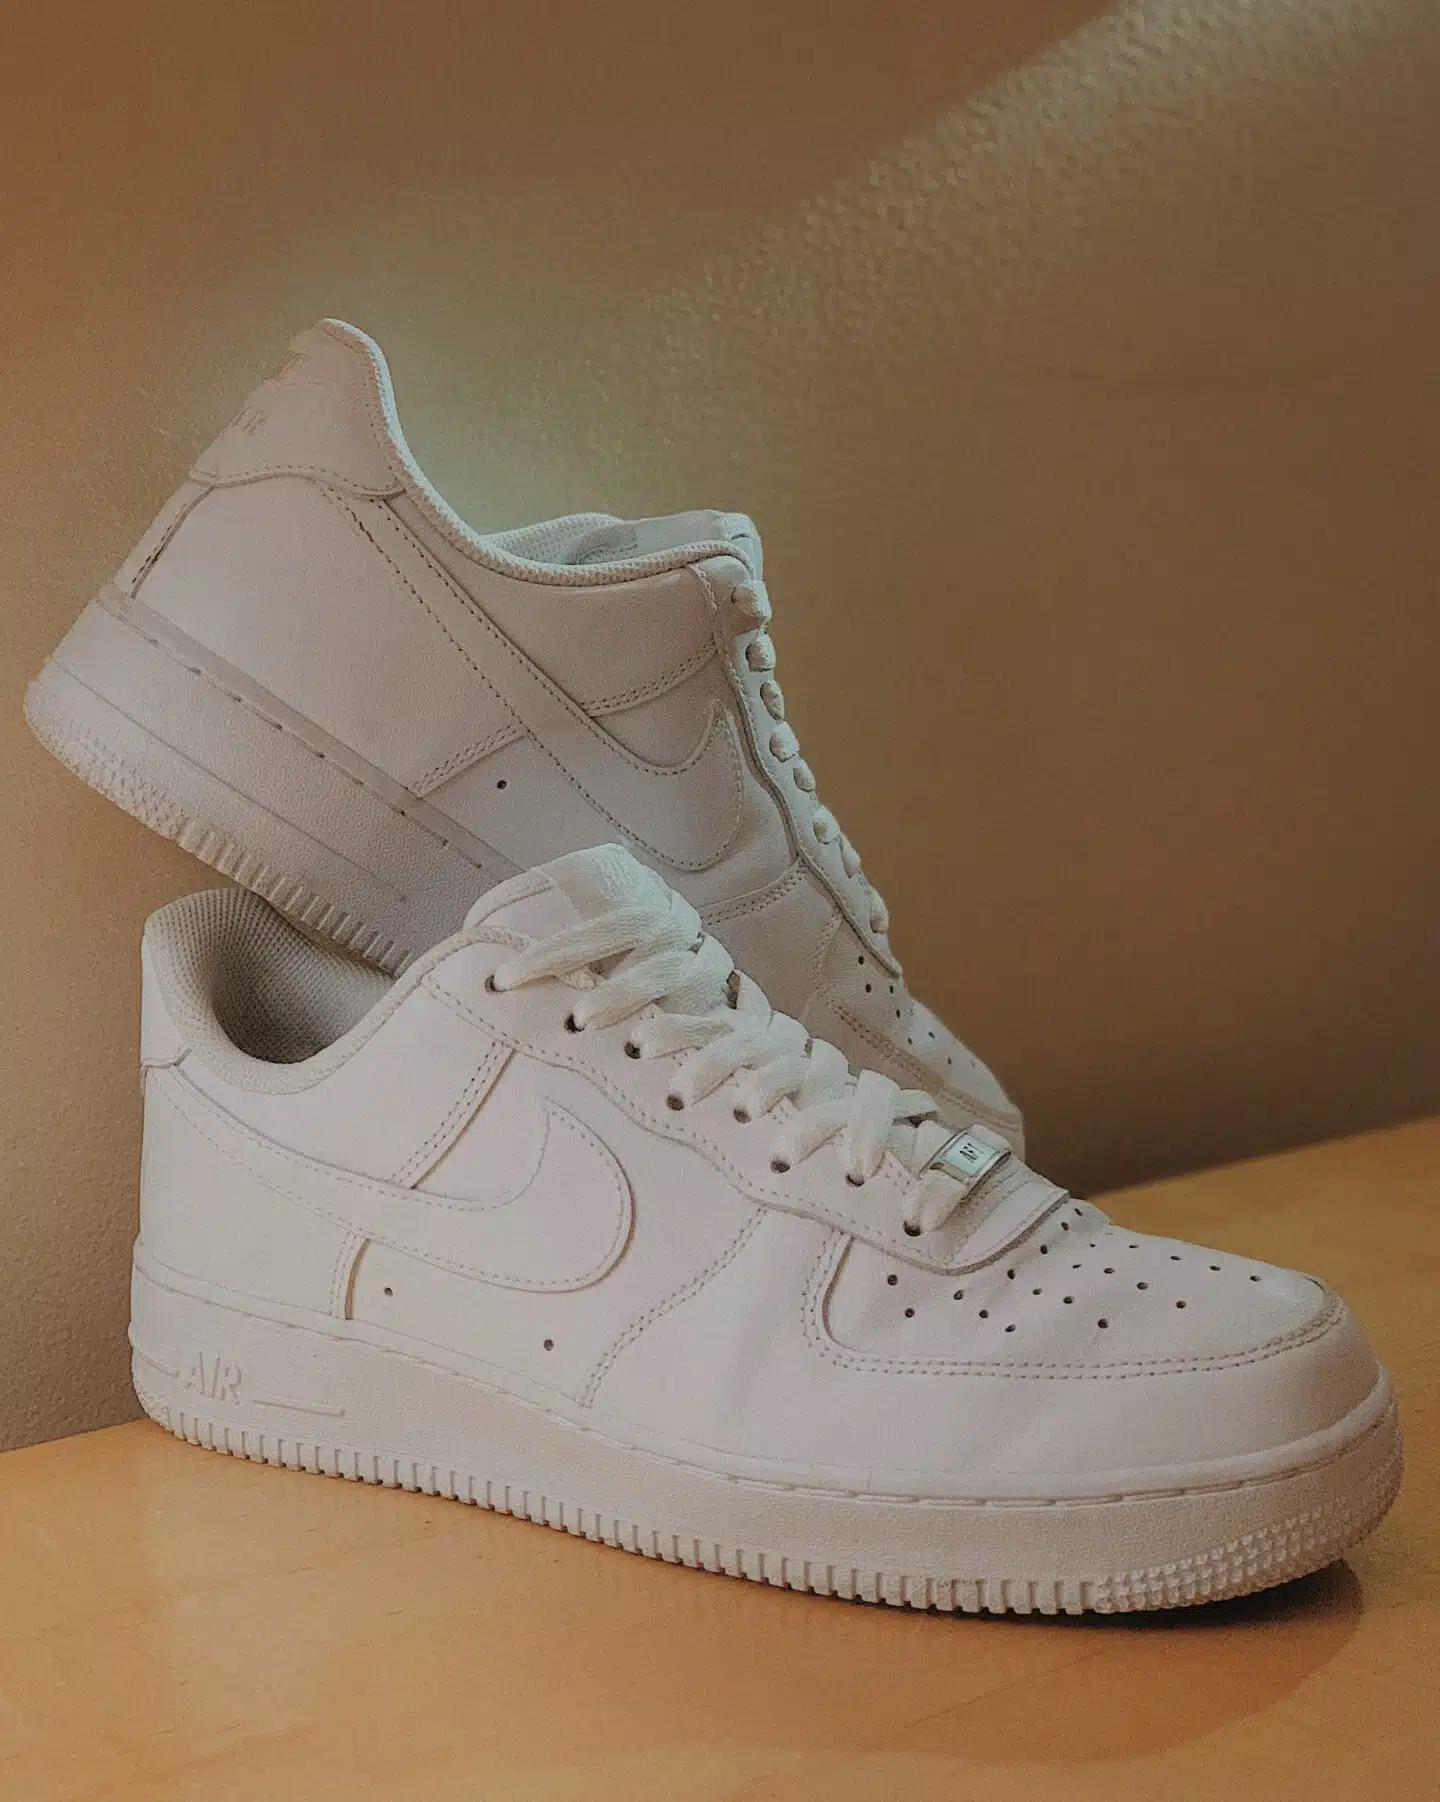 A pair of Nike Air Force 1 '07 women's white leather sneakers.